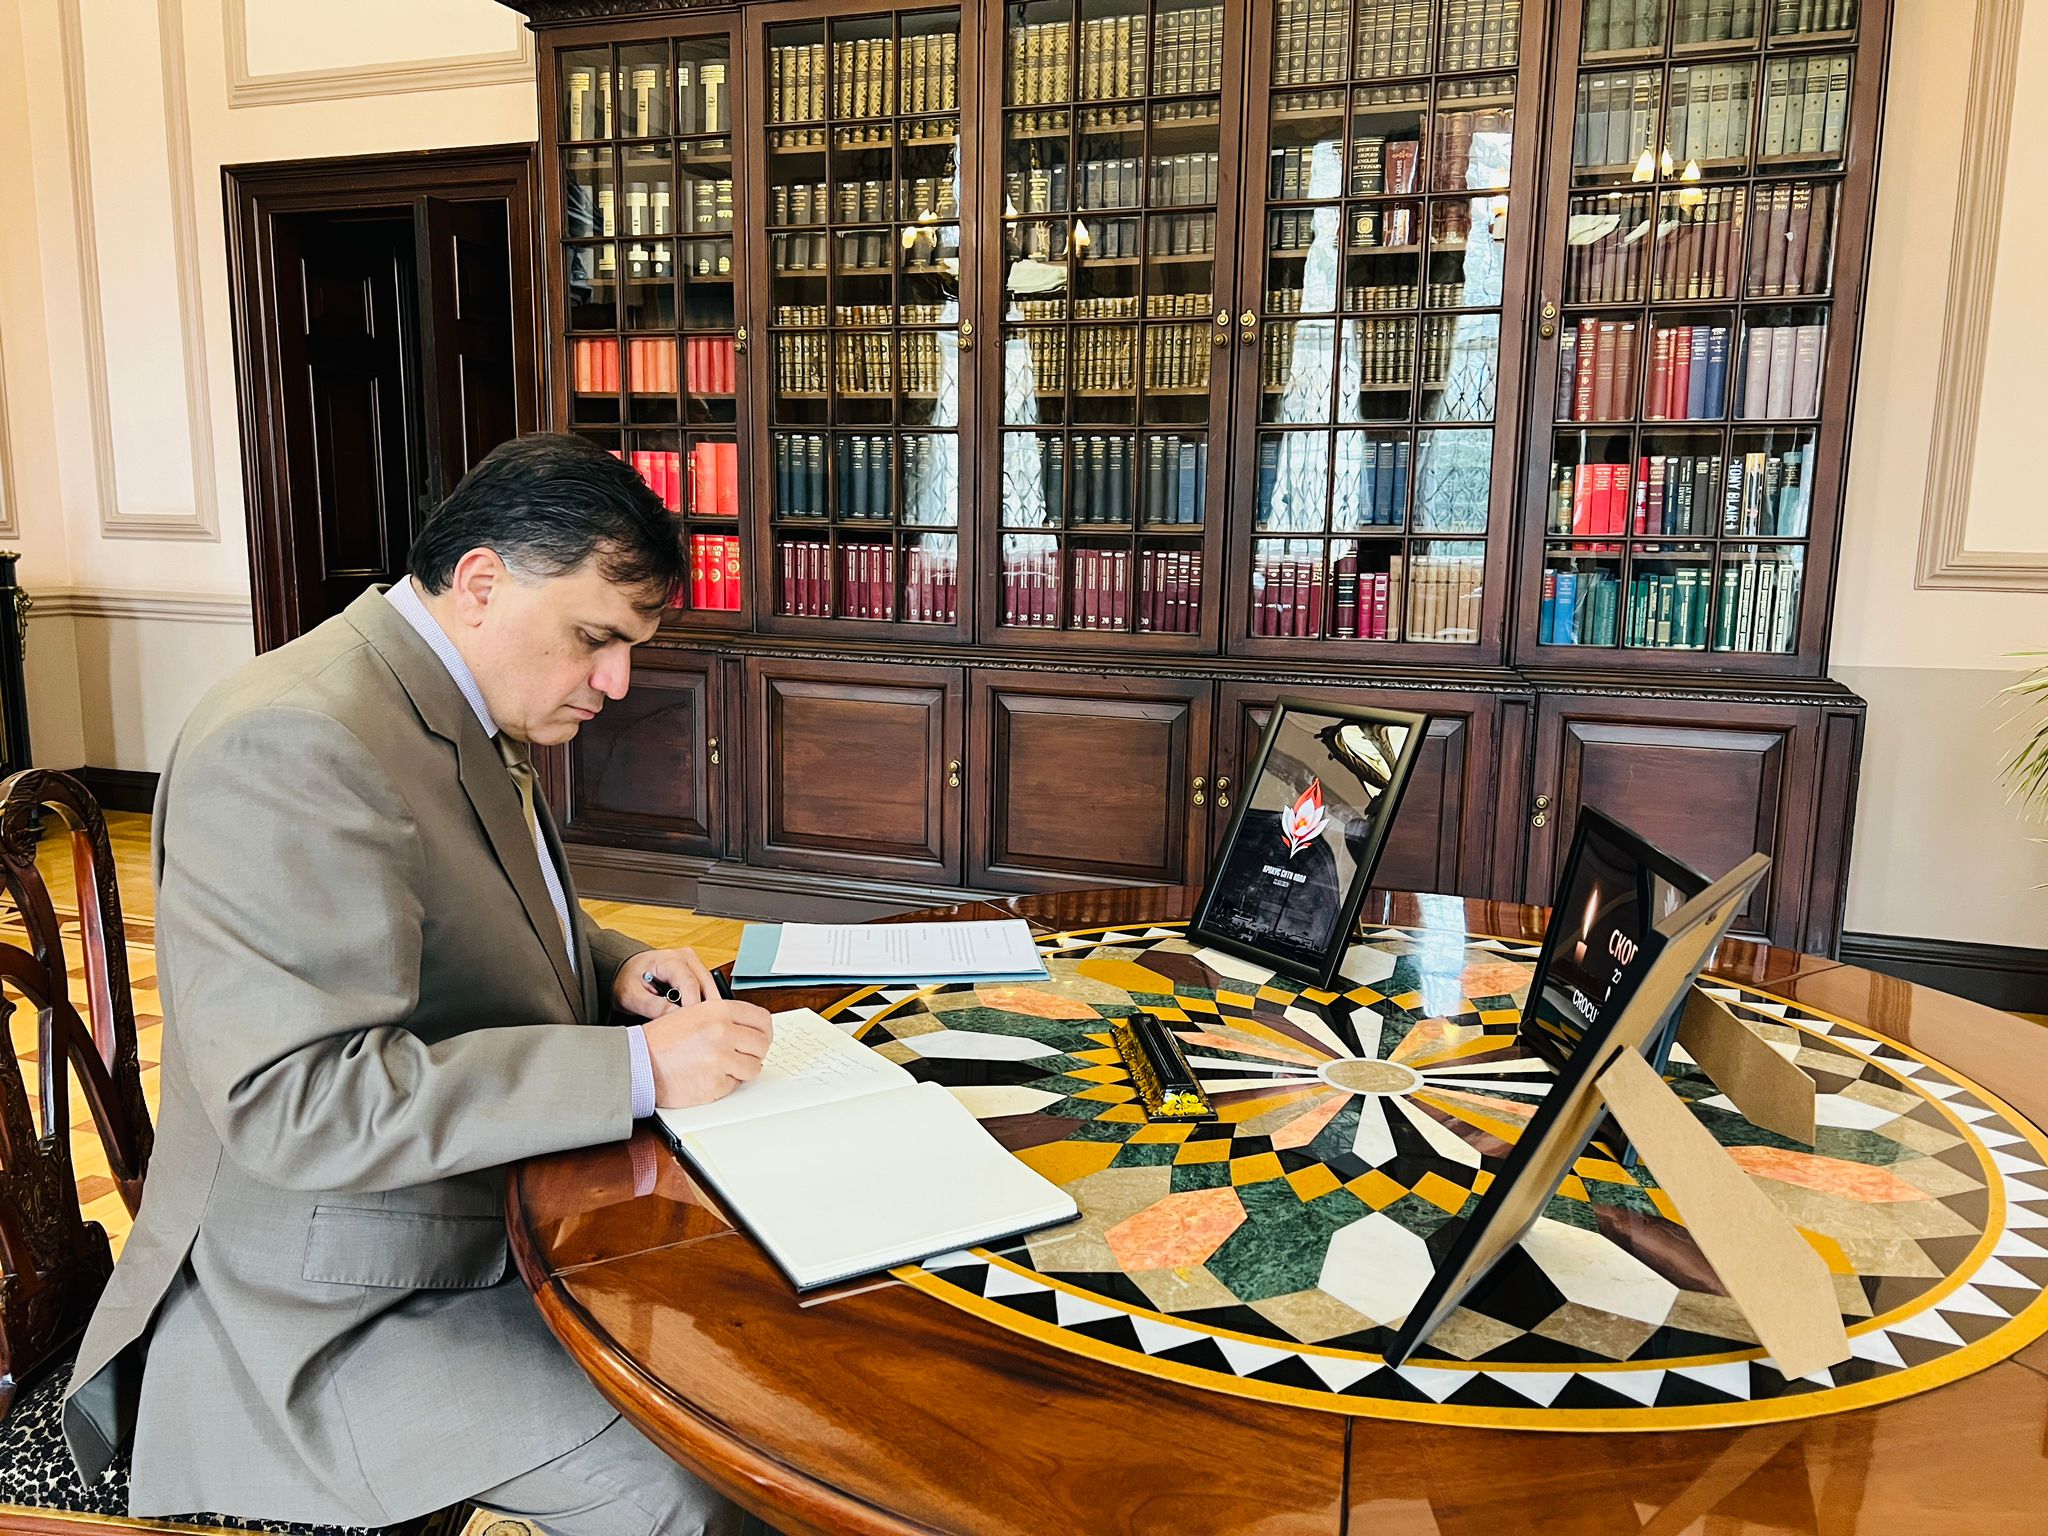 High Commissioner Dr. Mohammad Faisal visited the Russian Embassy in London to convey Pakistan’s condolences to the Russian people and government on the deadly terrorist attack